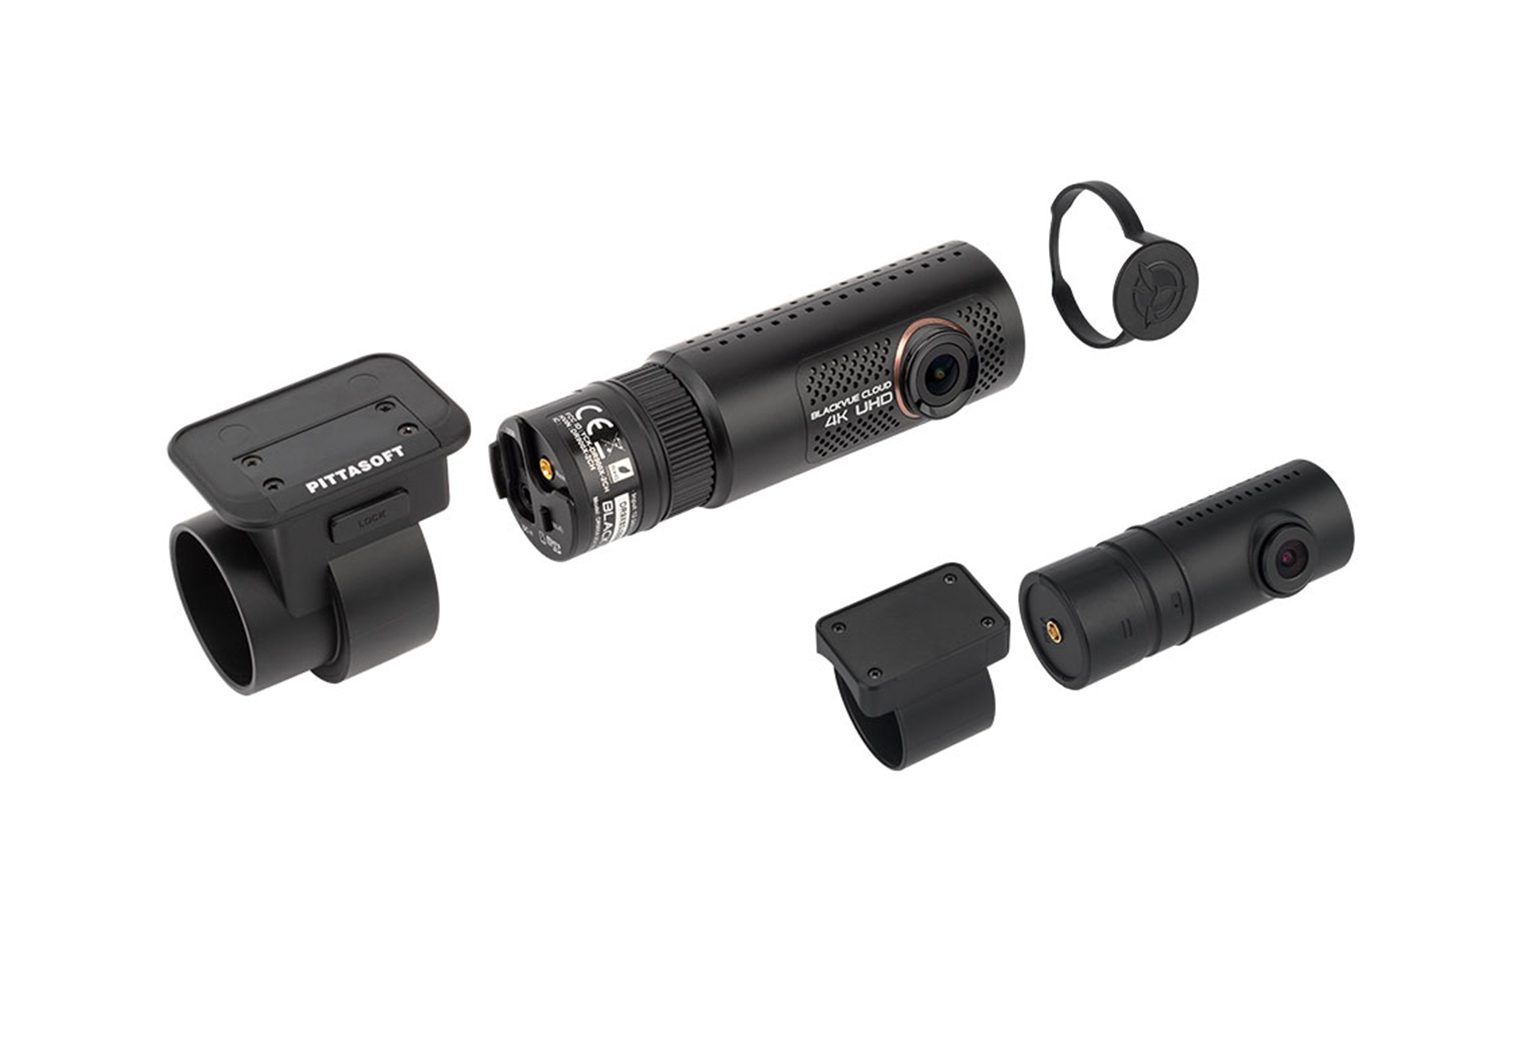 BlackVue DR900X components that come with the camera